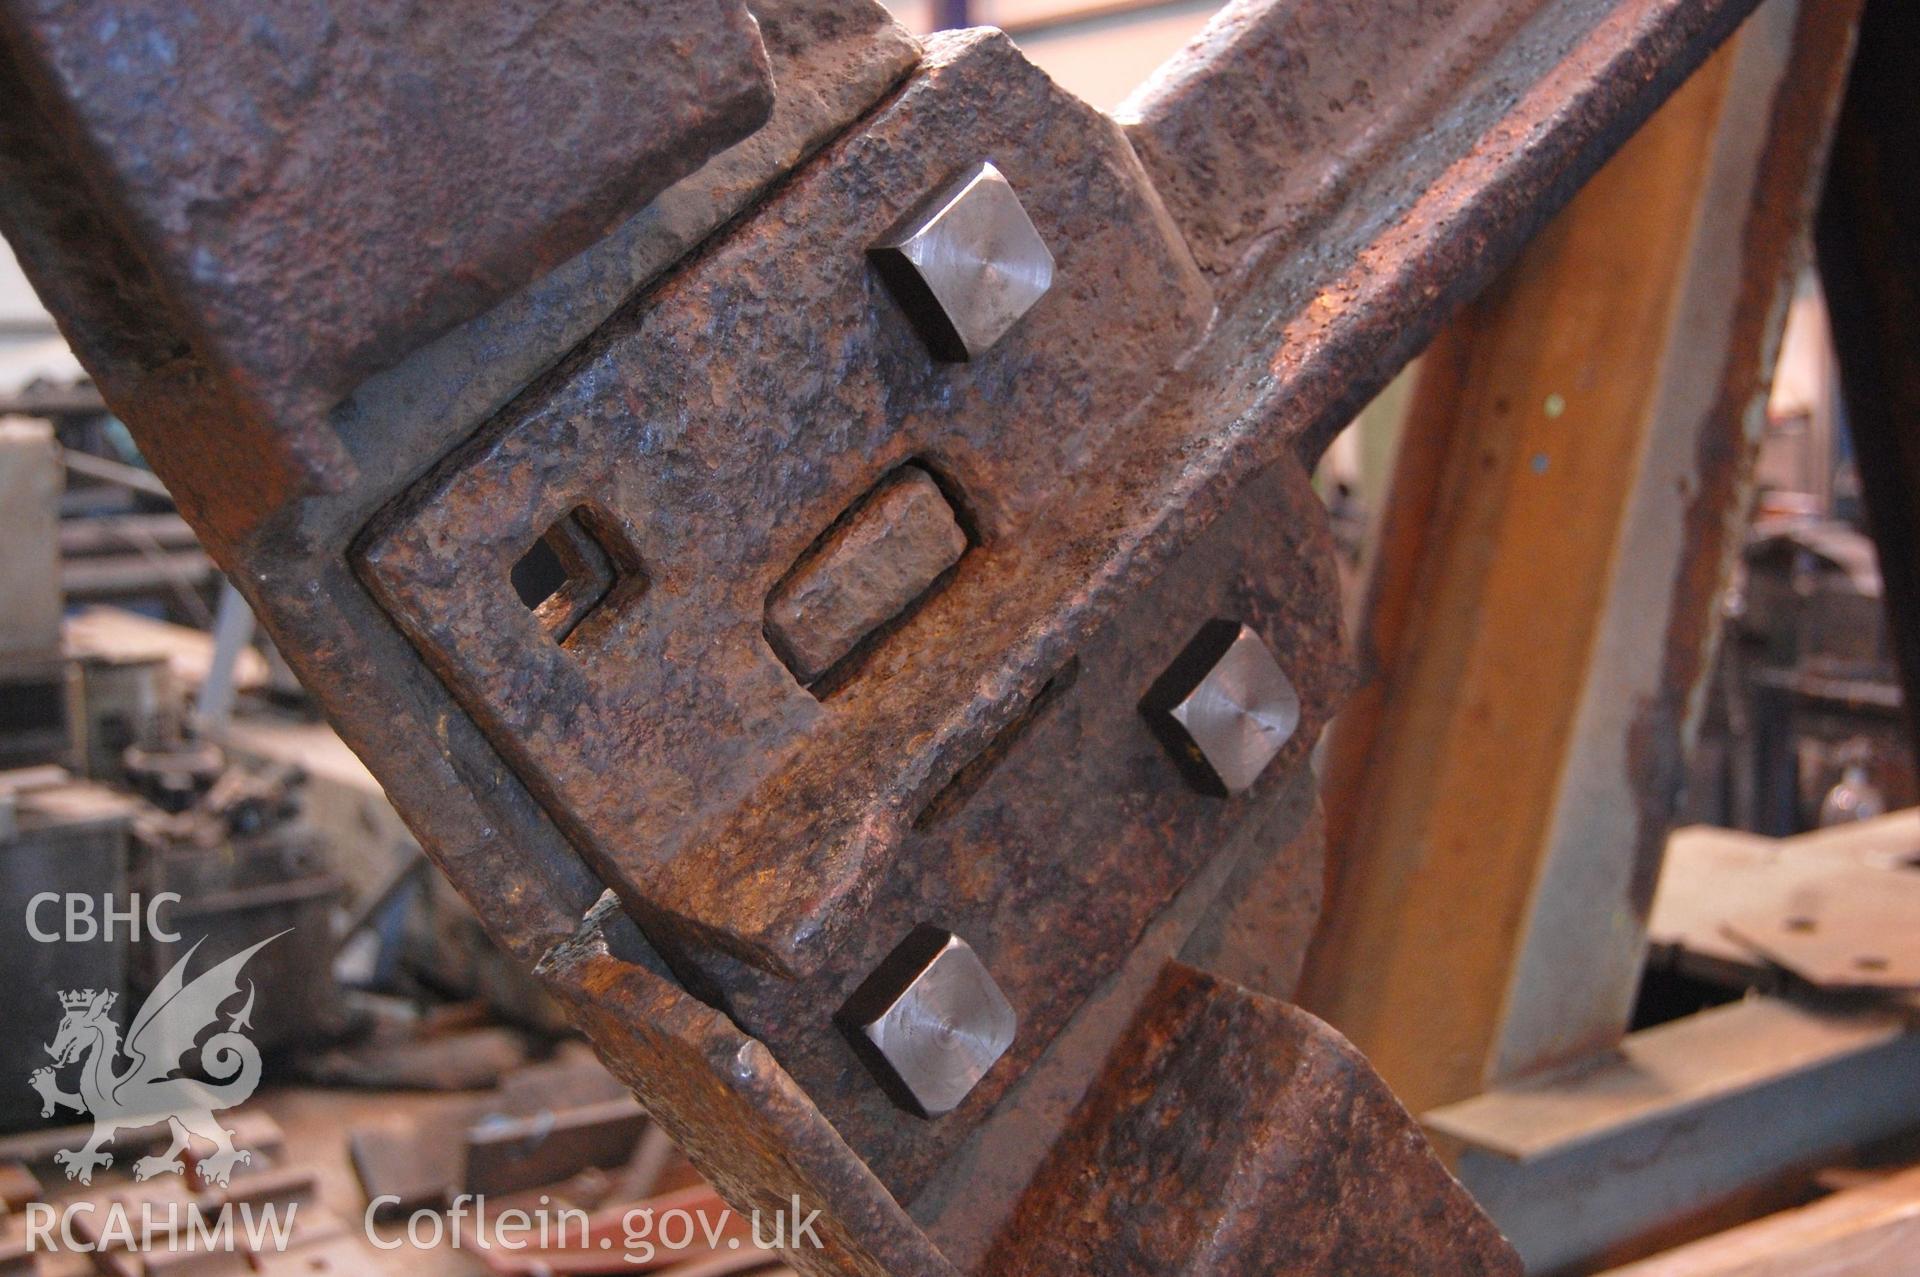 Digital image relating to Melingriffith Water Pump: Enlarged view showing replacement square head bolts.